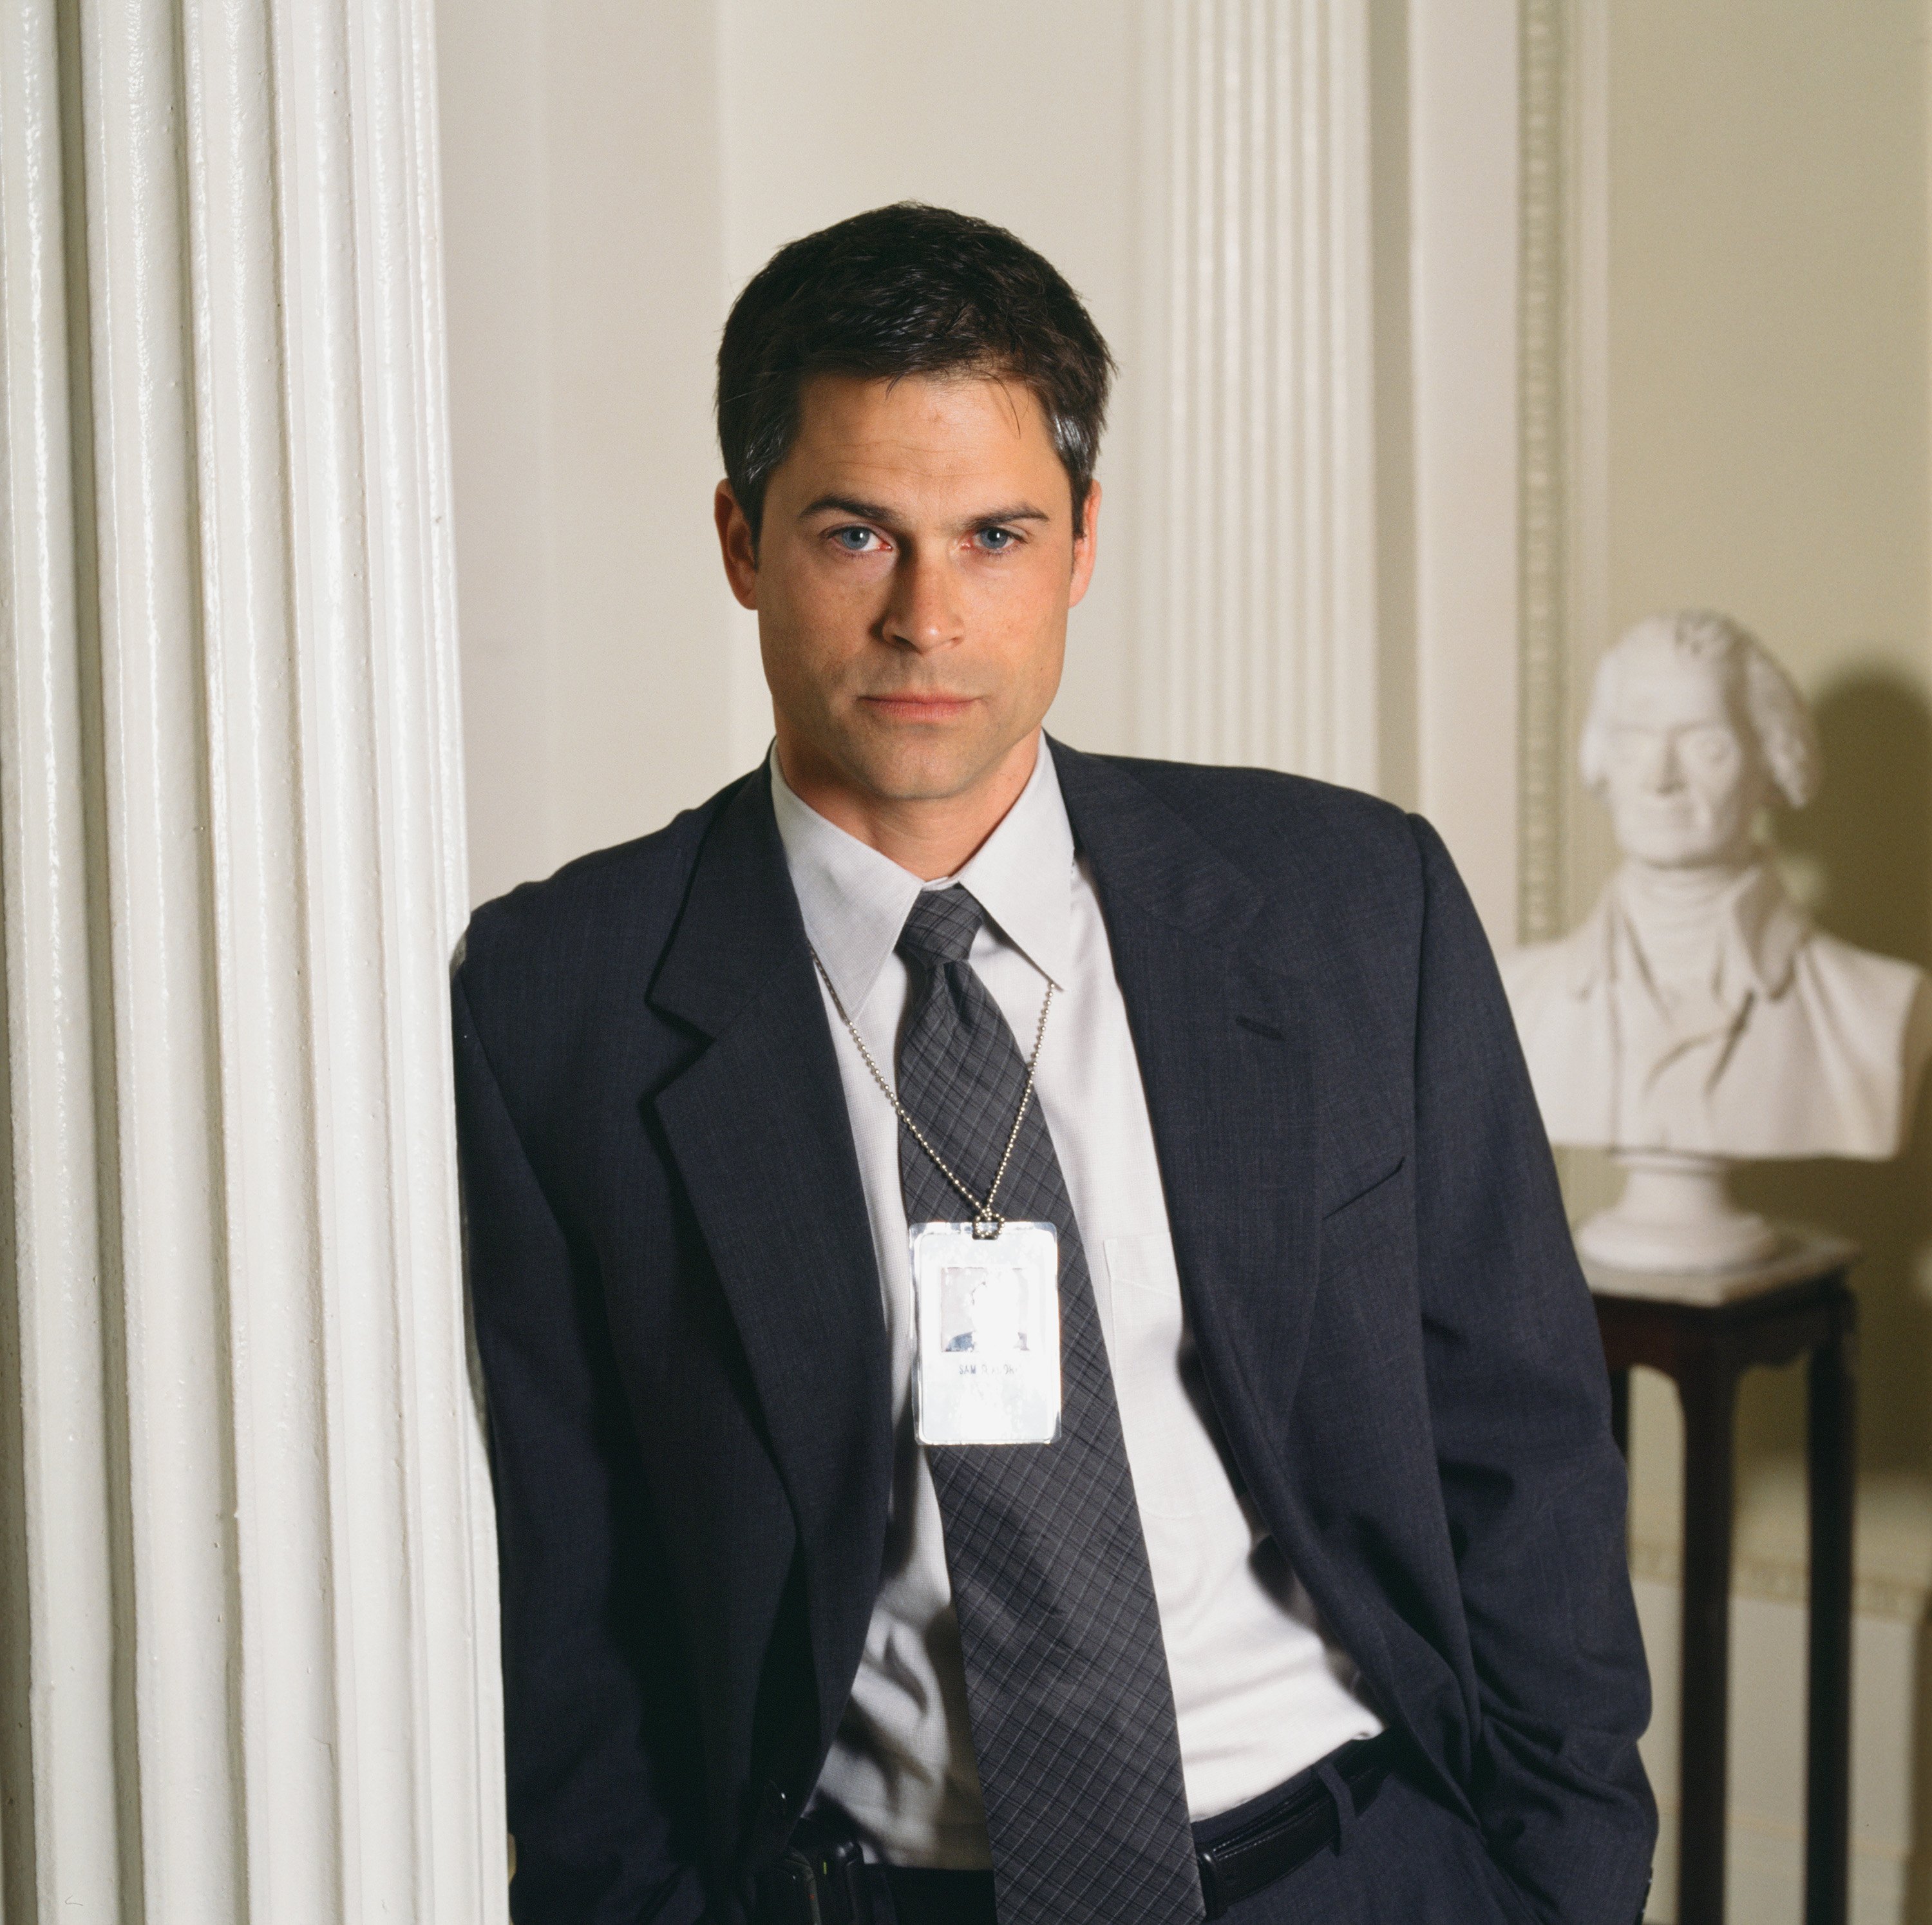 Rob Lowe as Sam Seaborn on Season 1 of "The West Wing" | Source: Getty Images